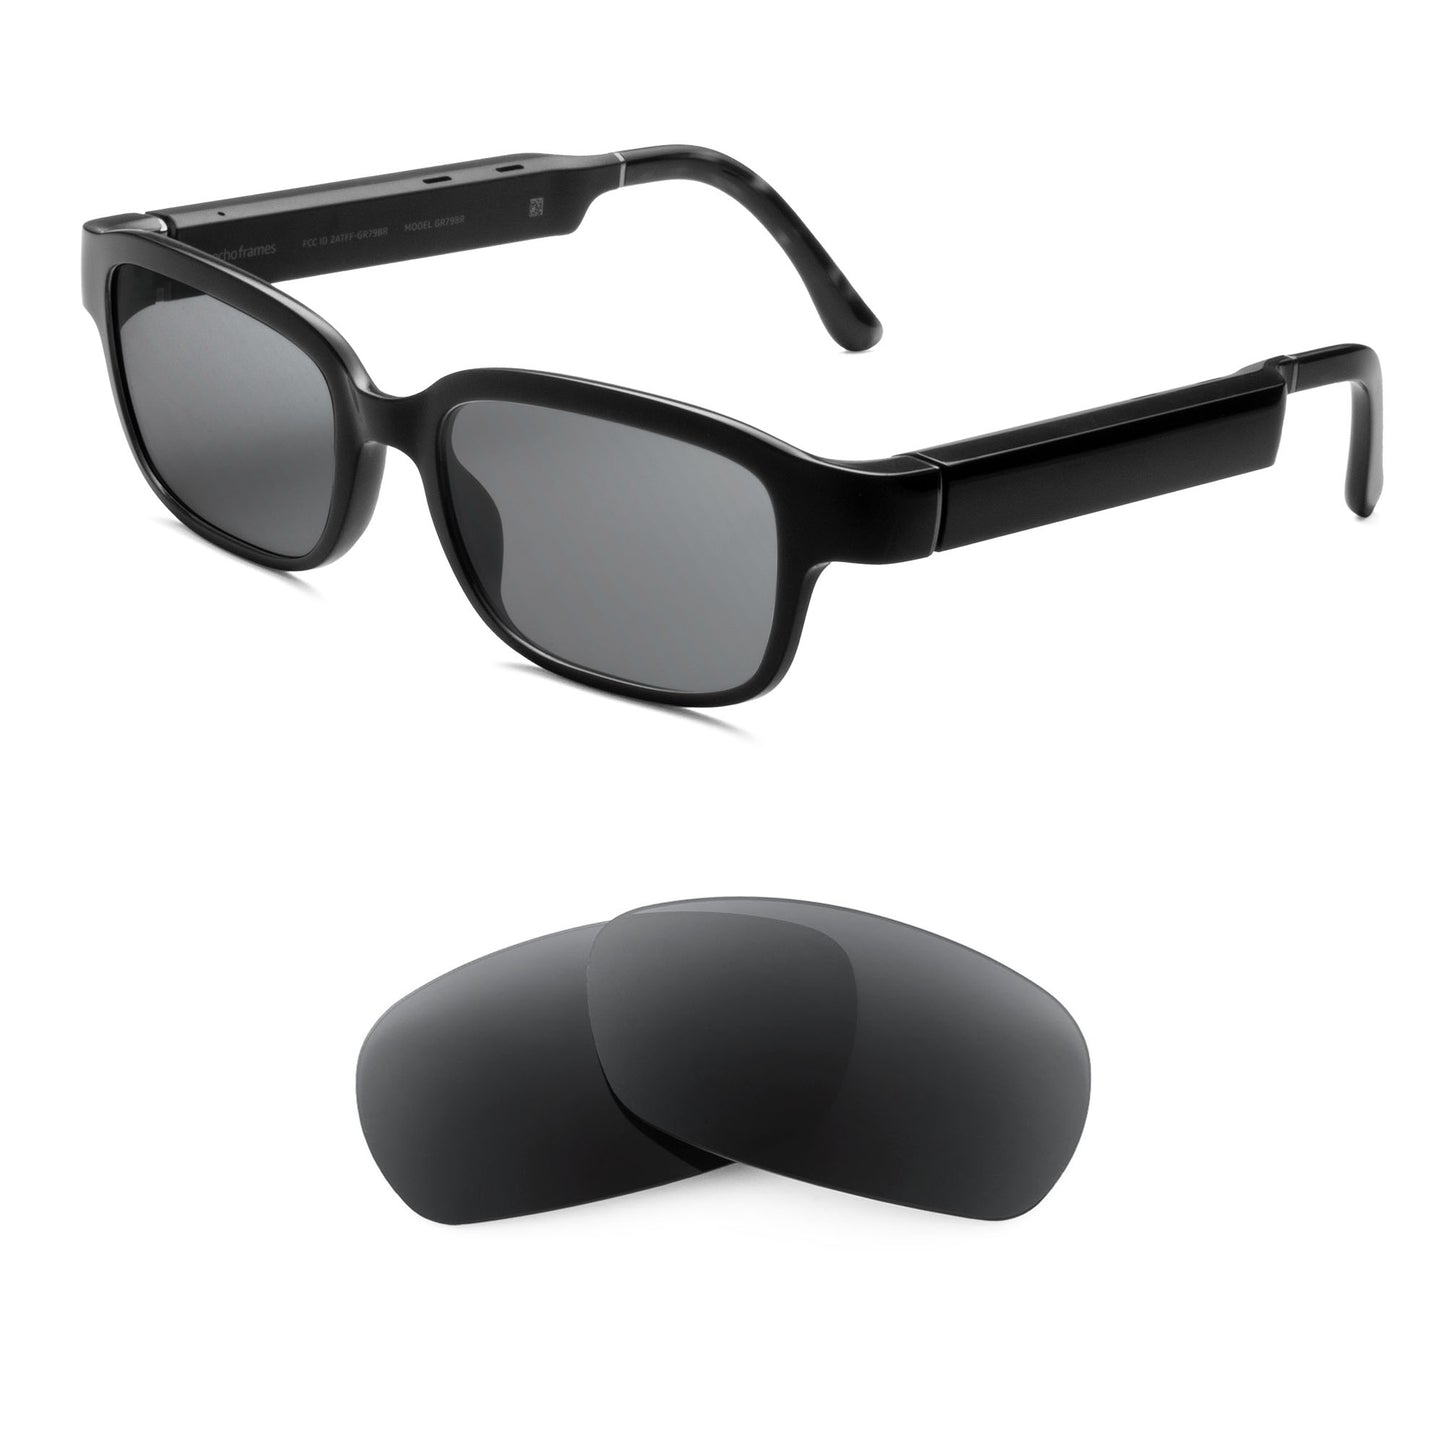 Amazon Echo Frame sunglasses with replacement lenses